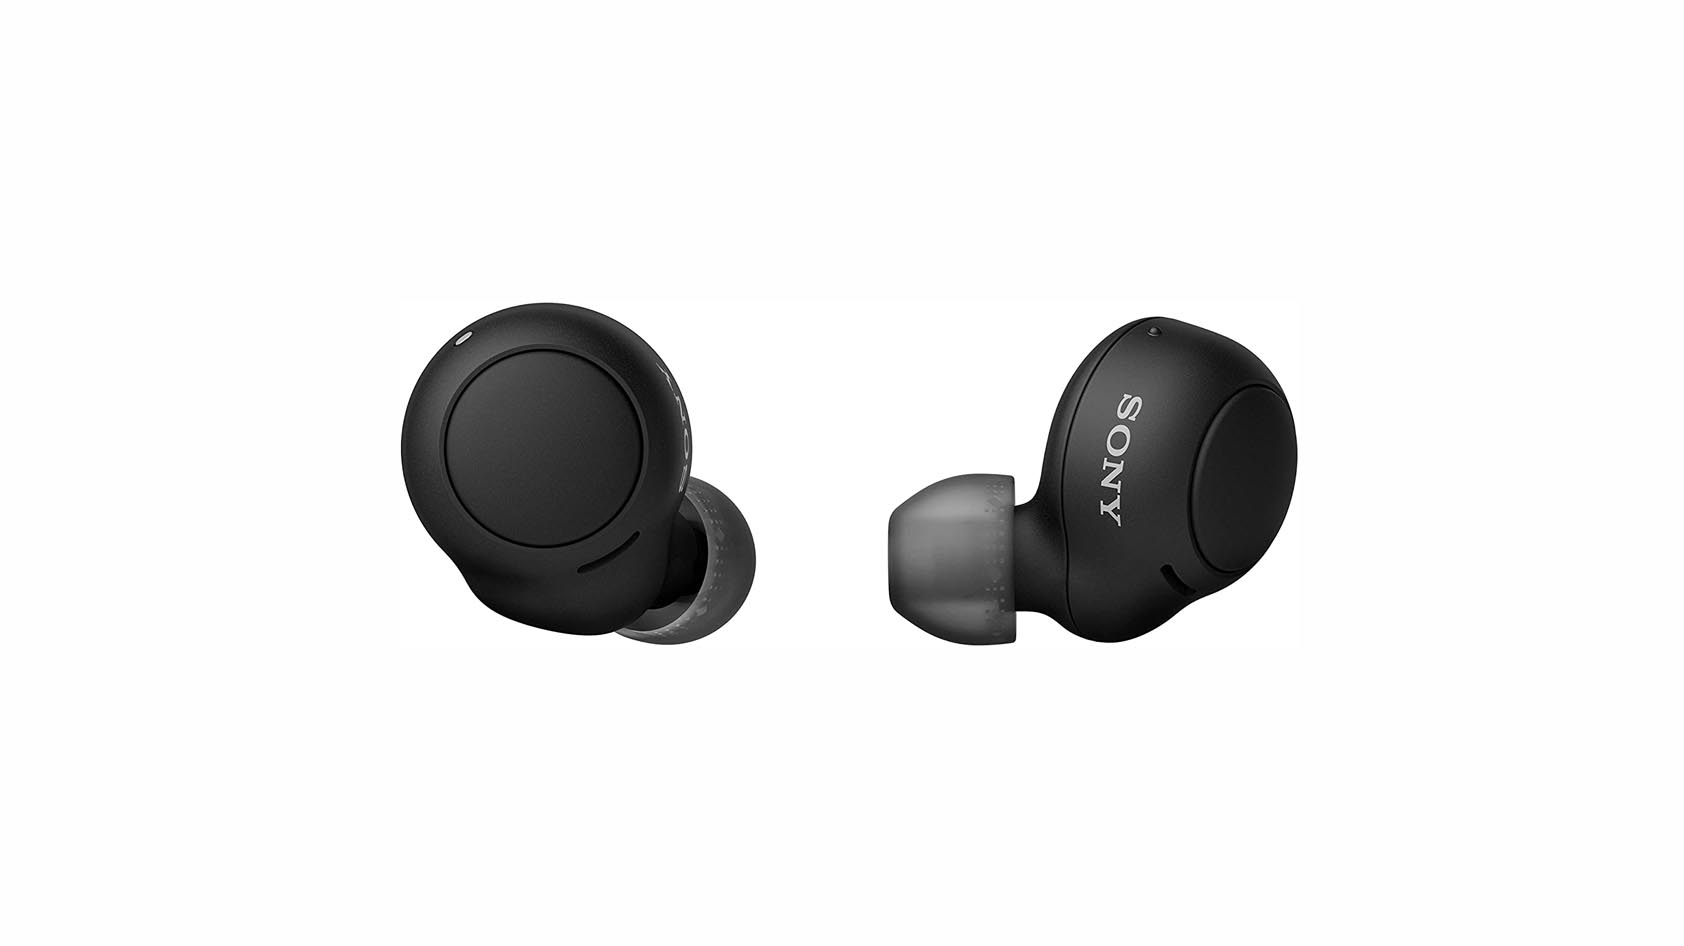 The Sony WF-C500 true wireless earbuds in black against a white background.